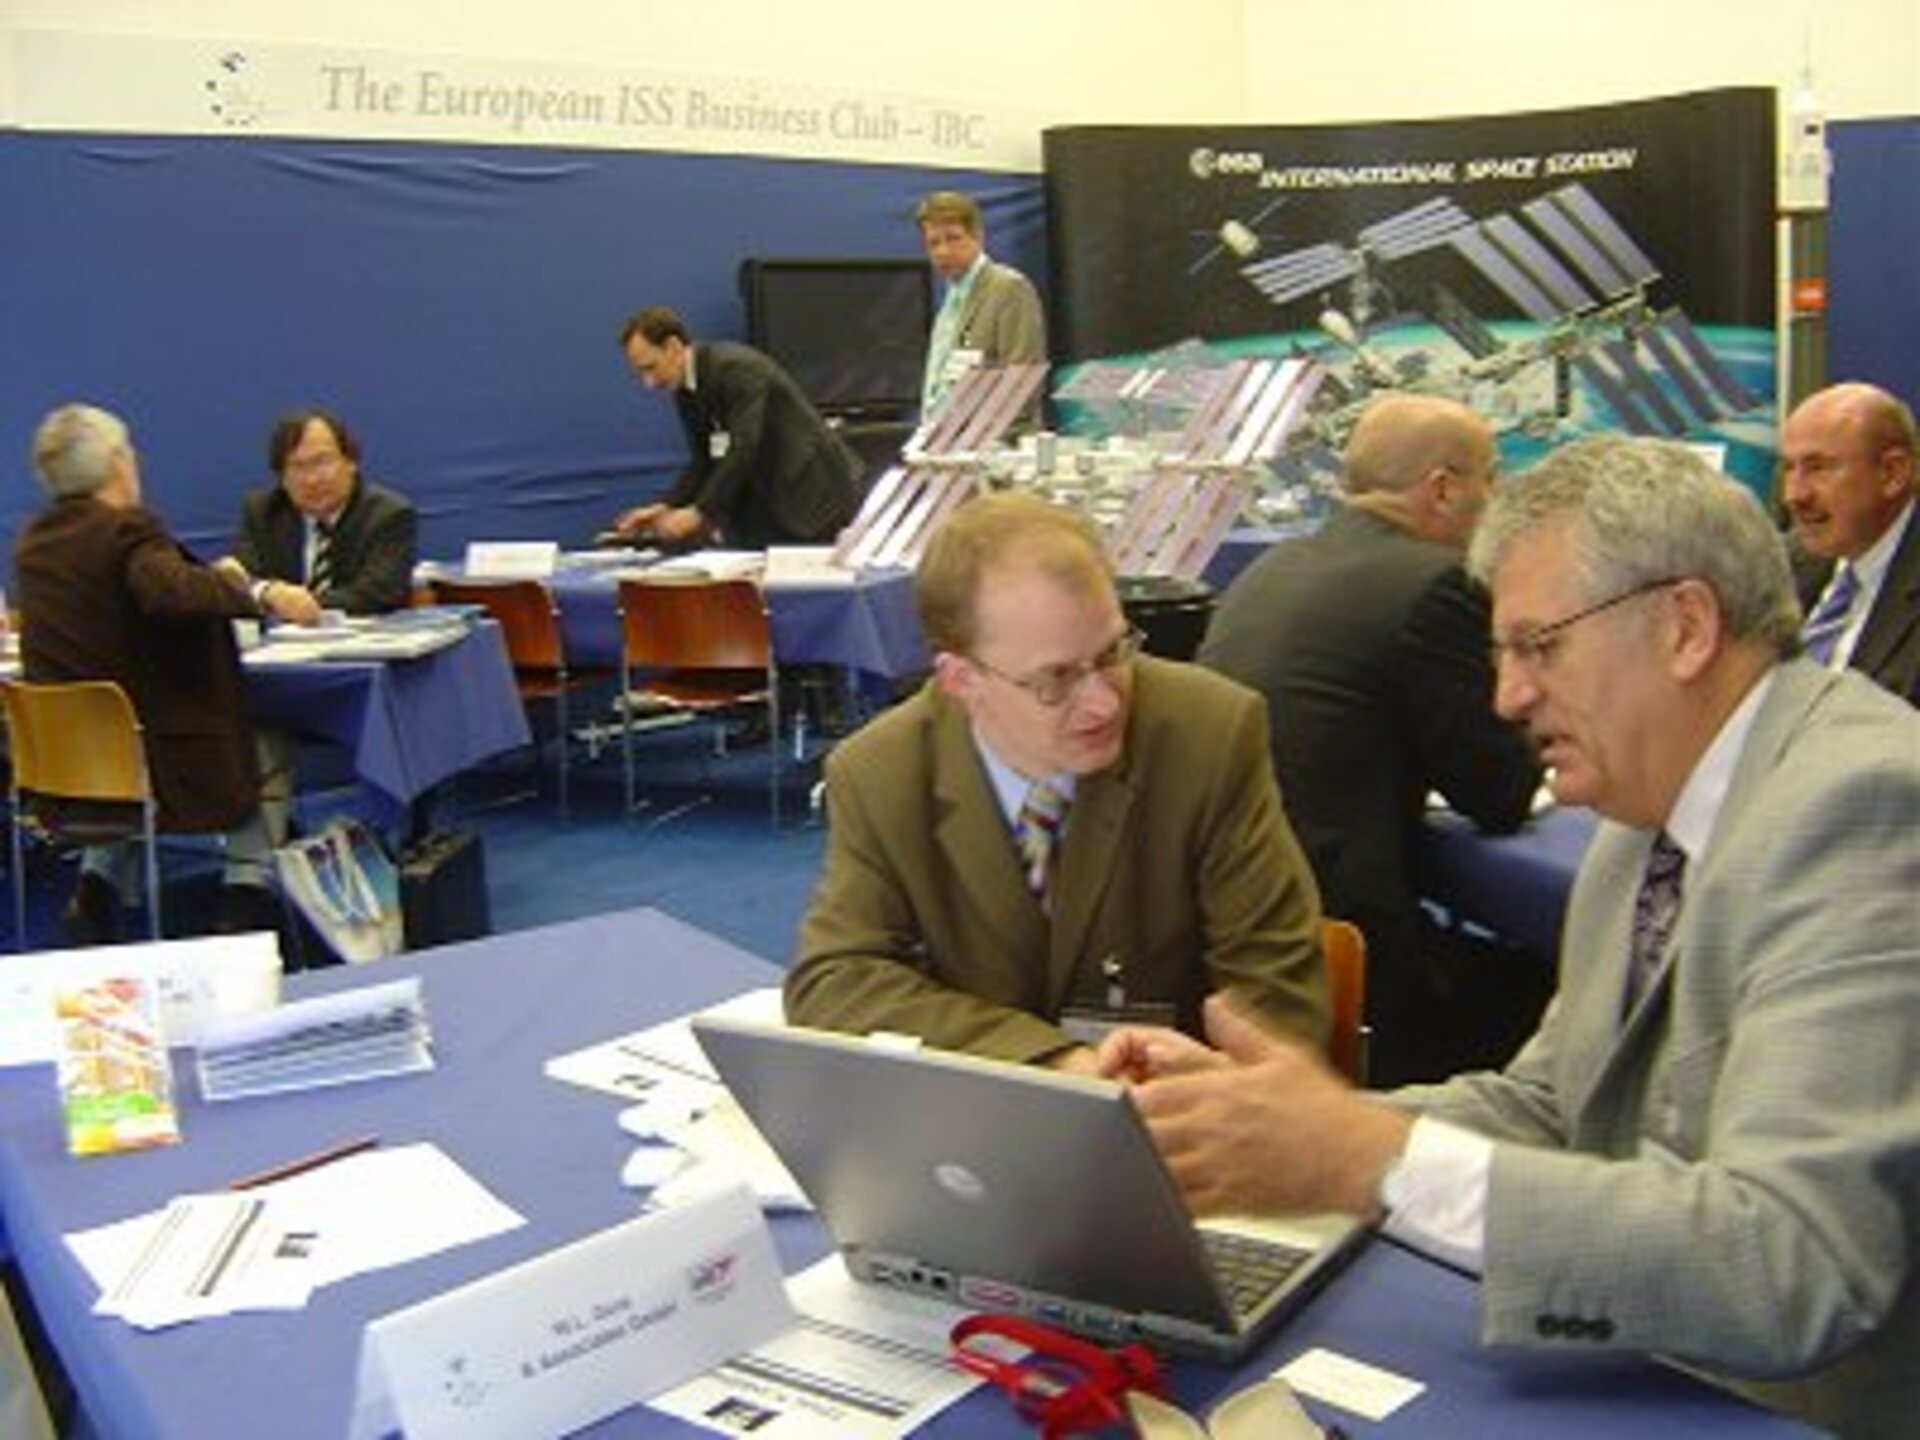 The IBC booth at the Industry Space Days 2006